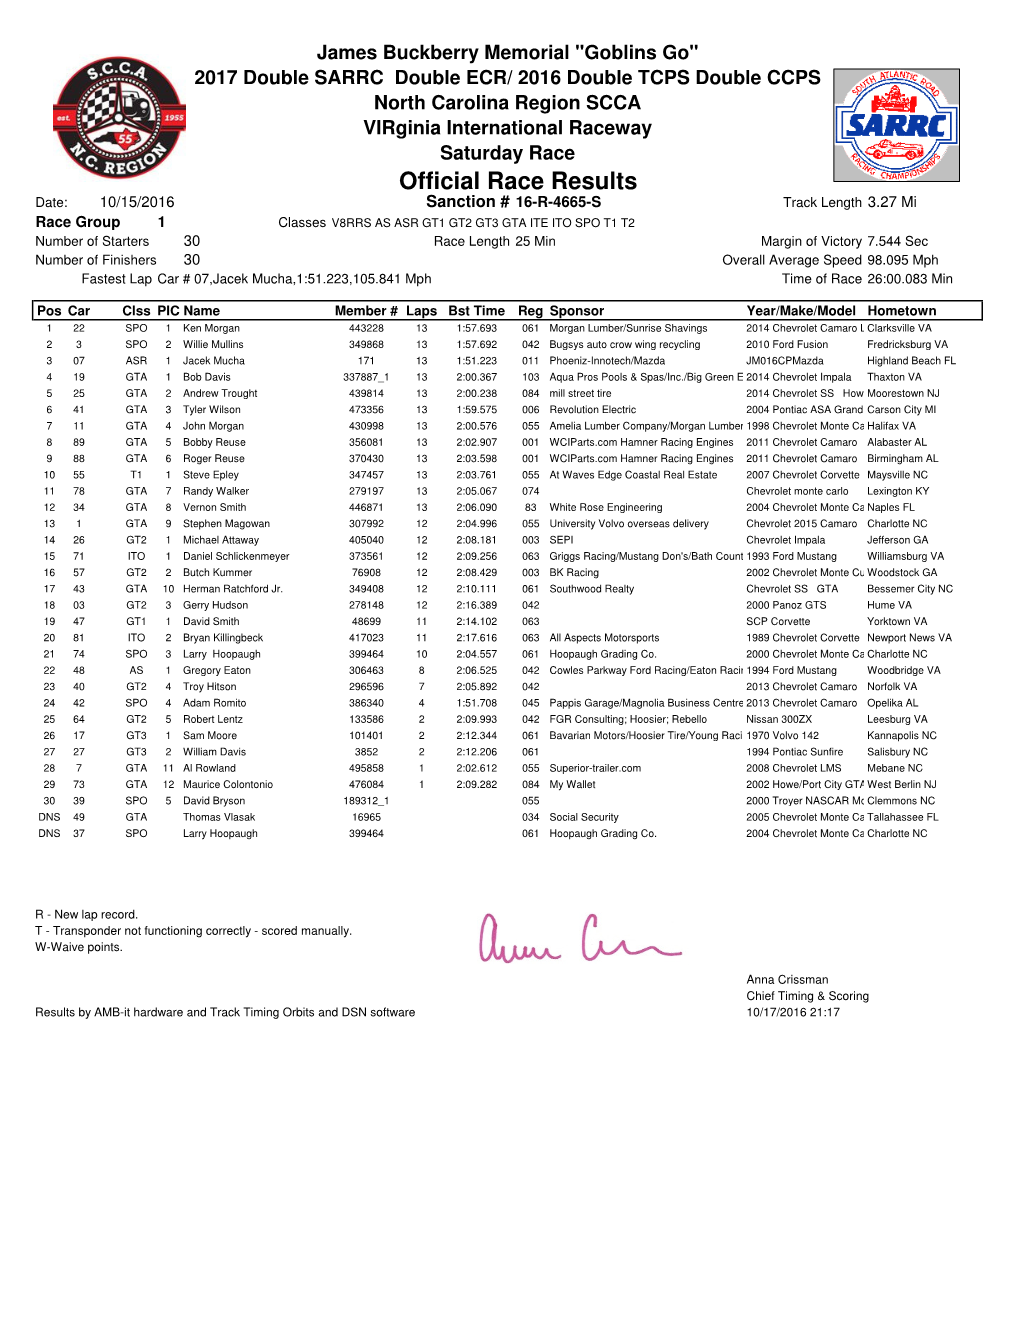 Official Race Results